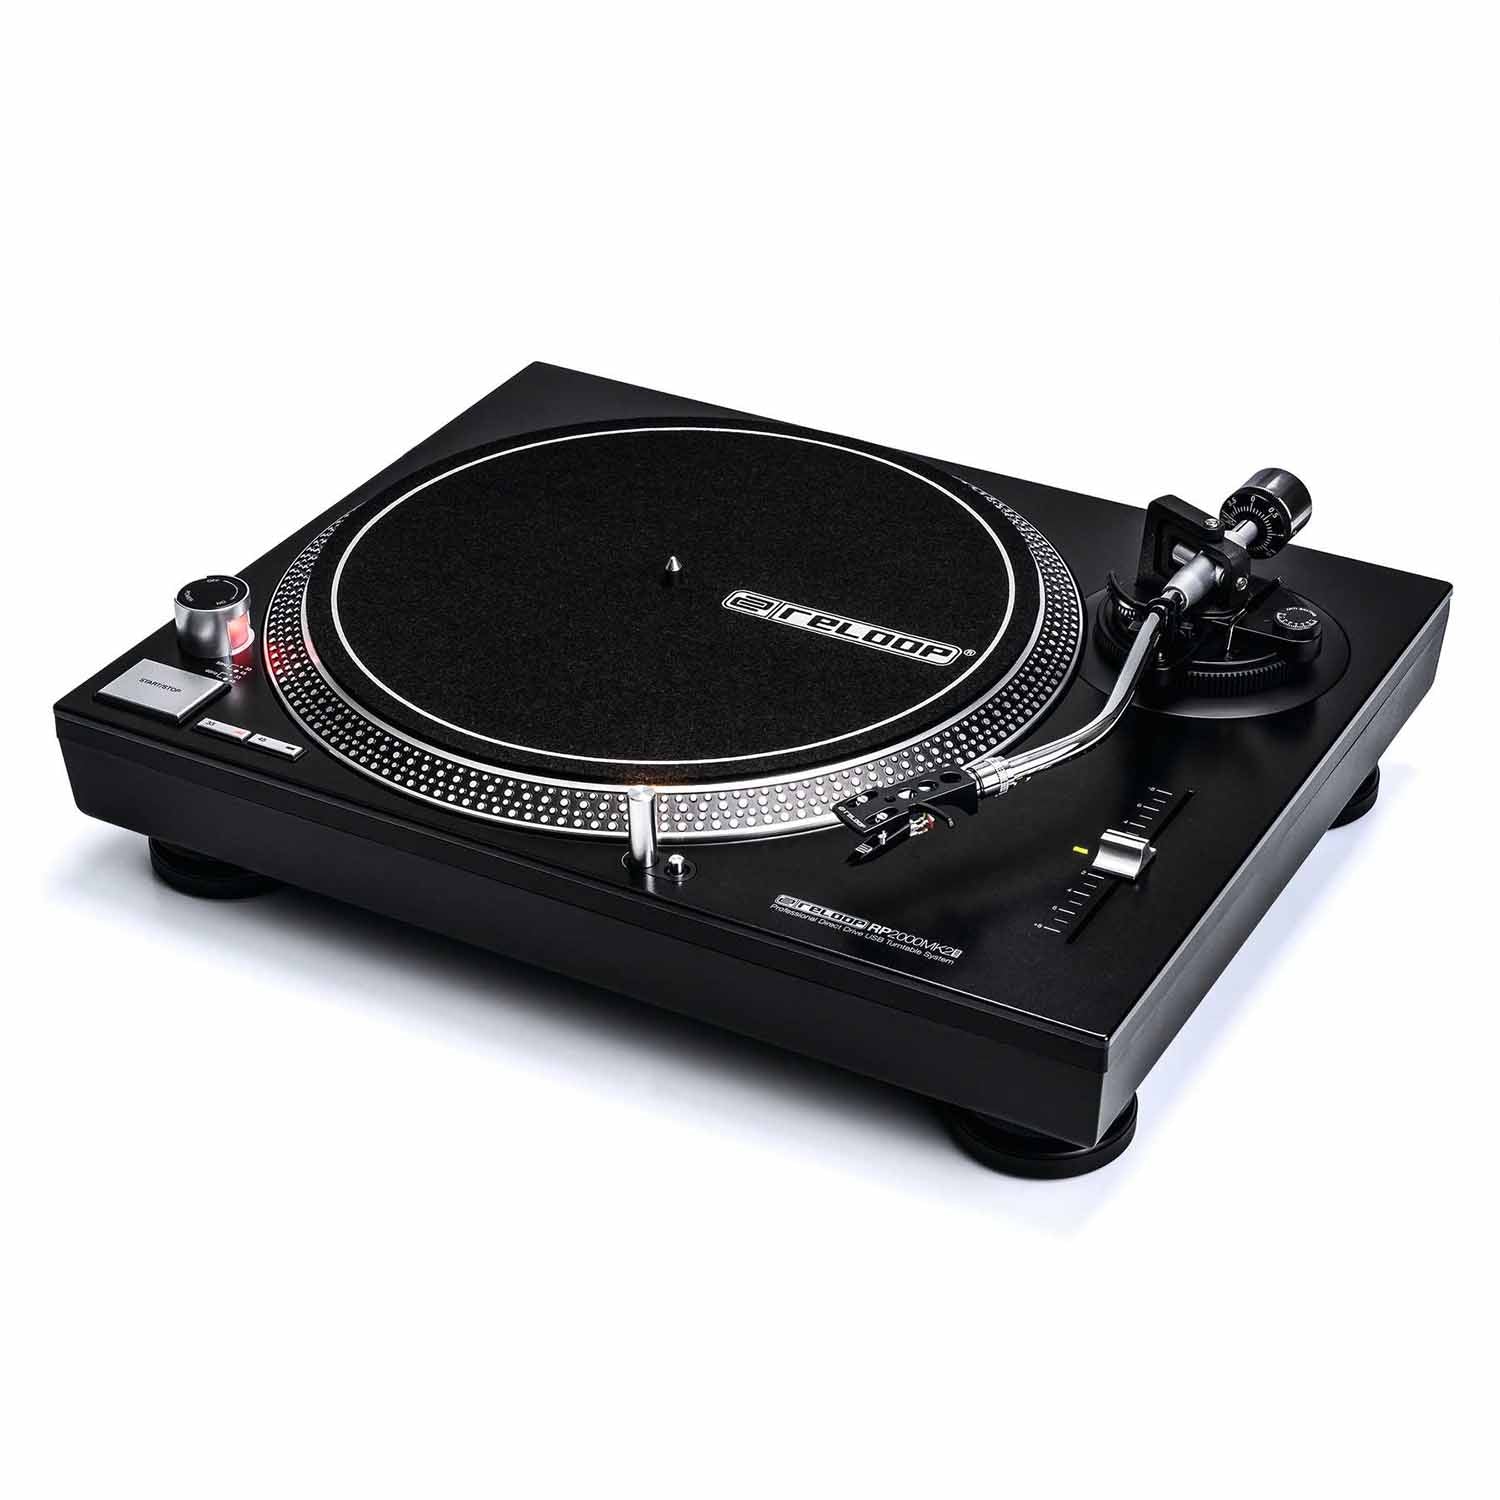 Discontinued: Reloop RP-2000-USB-MK2, Professional Direct Drive USB Turntable System - Hollywood DJ